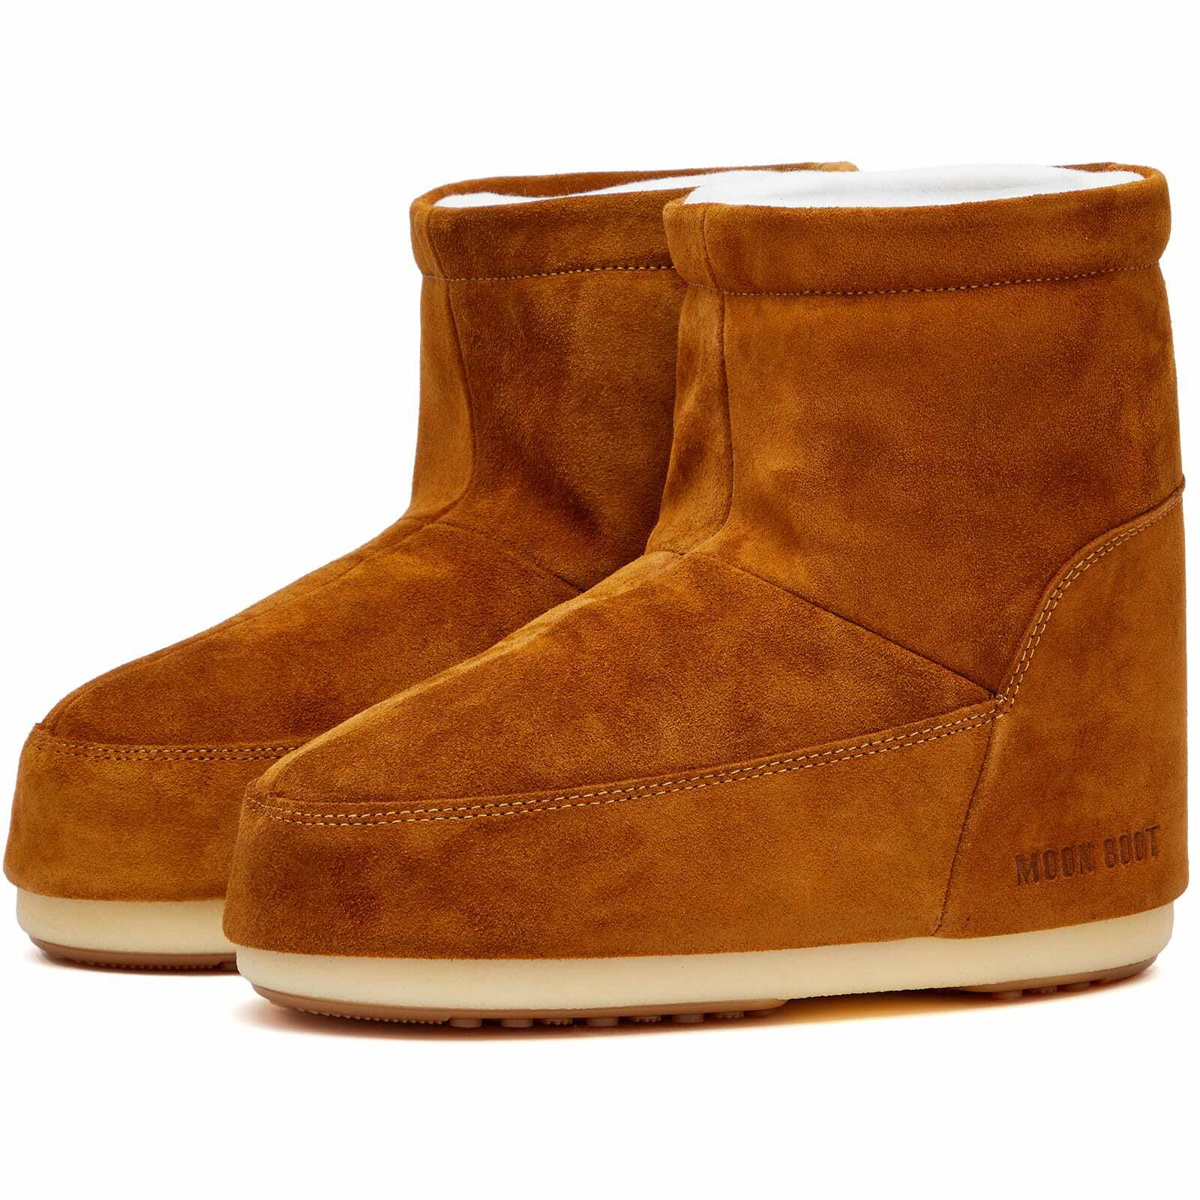 MOON BOOT Icon Low suede snow boots